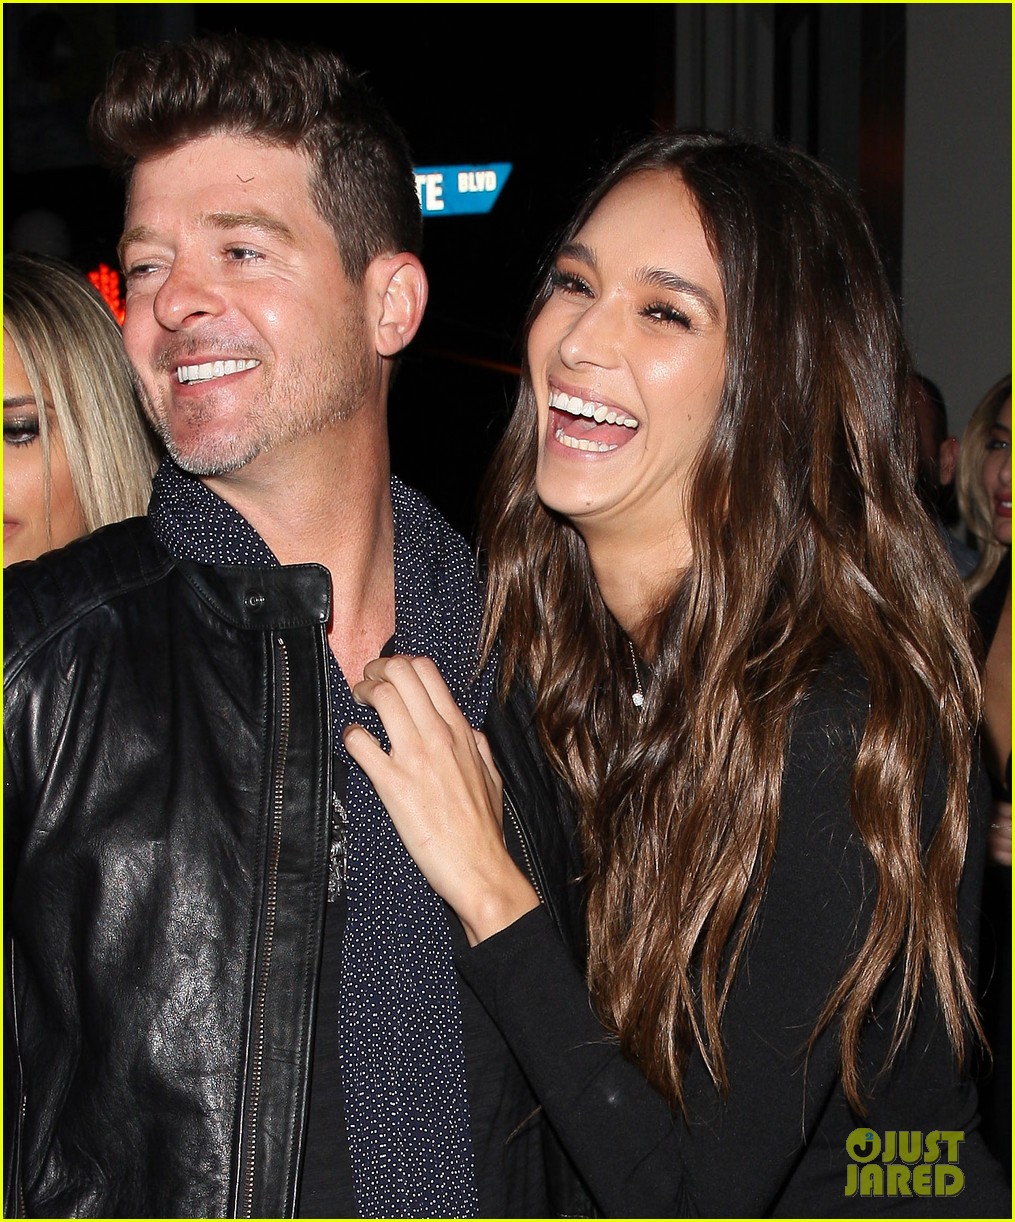 Robin Thicke and his girlfriend April Love Geary share a cute moment togeth...